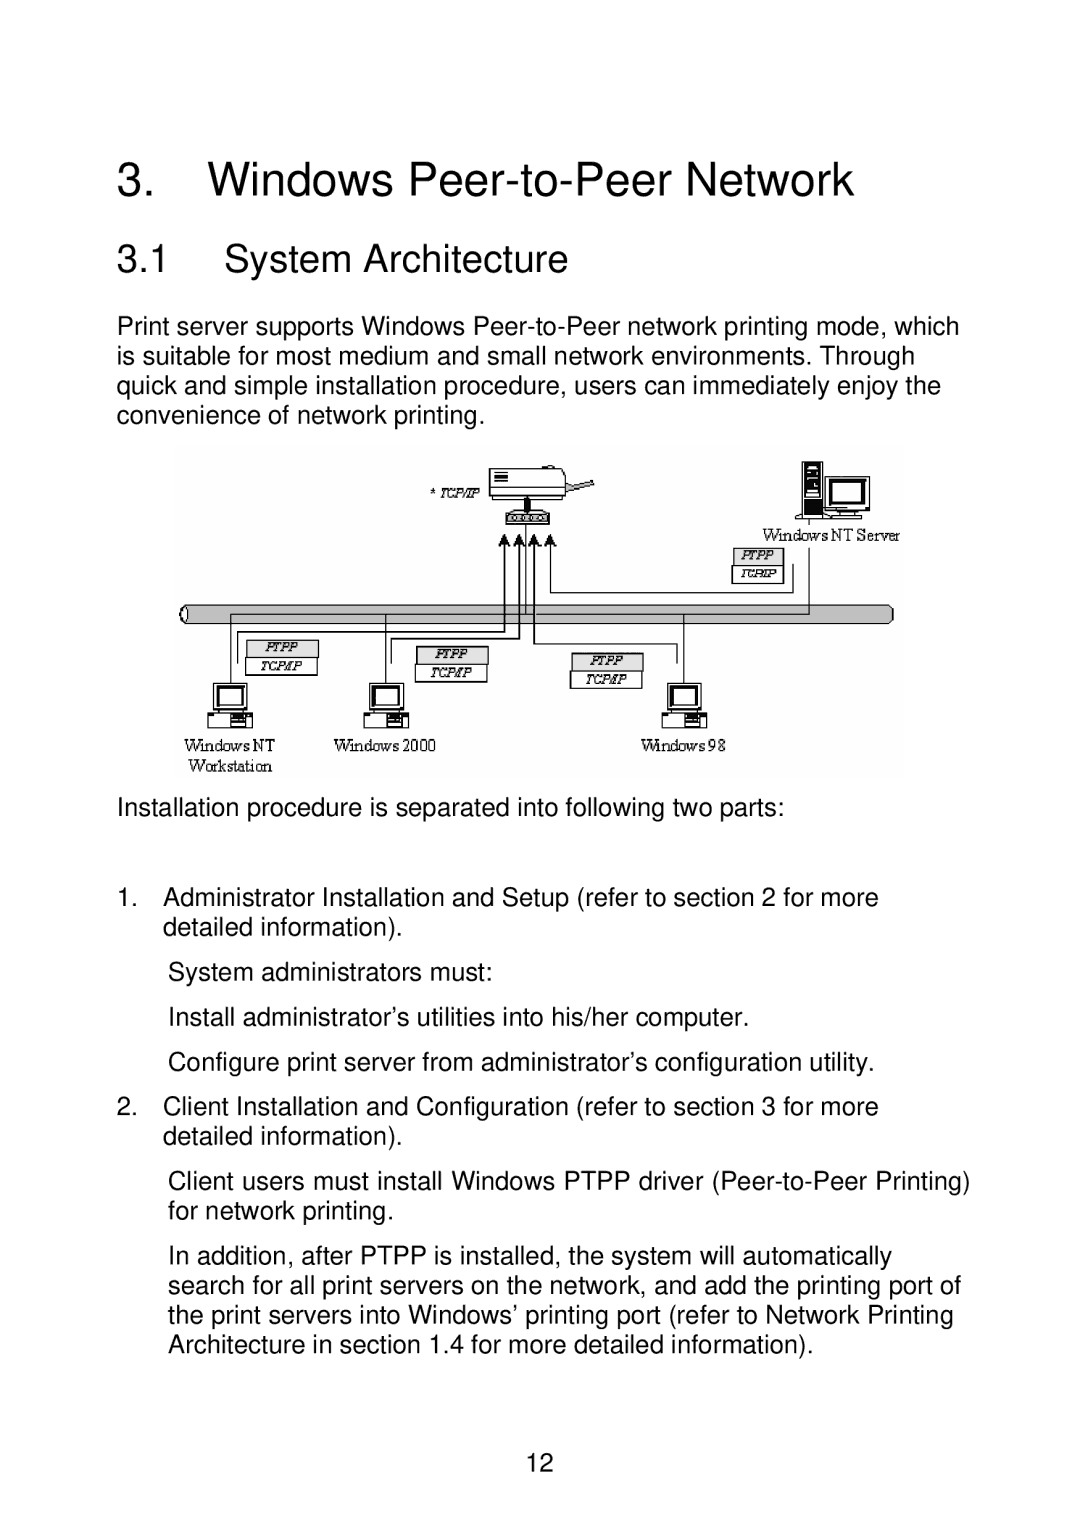 MicroNet Technology SP766W user manual Windows Peer-to-Peer Network, System Architecture 